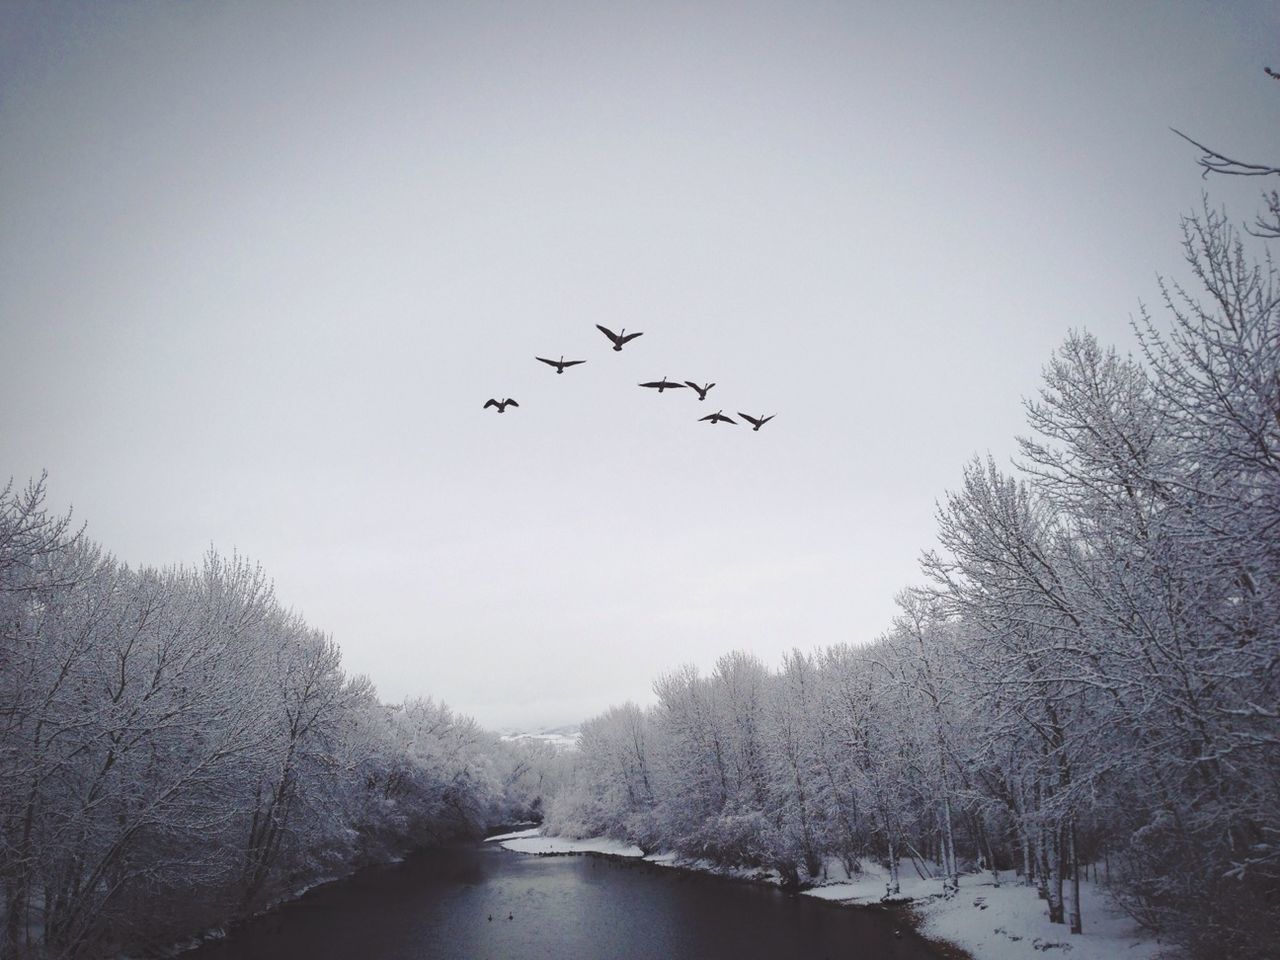 Low angle view of birds flying over countryside lake in winter